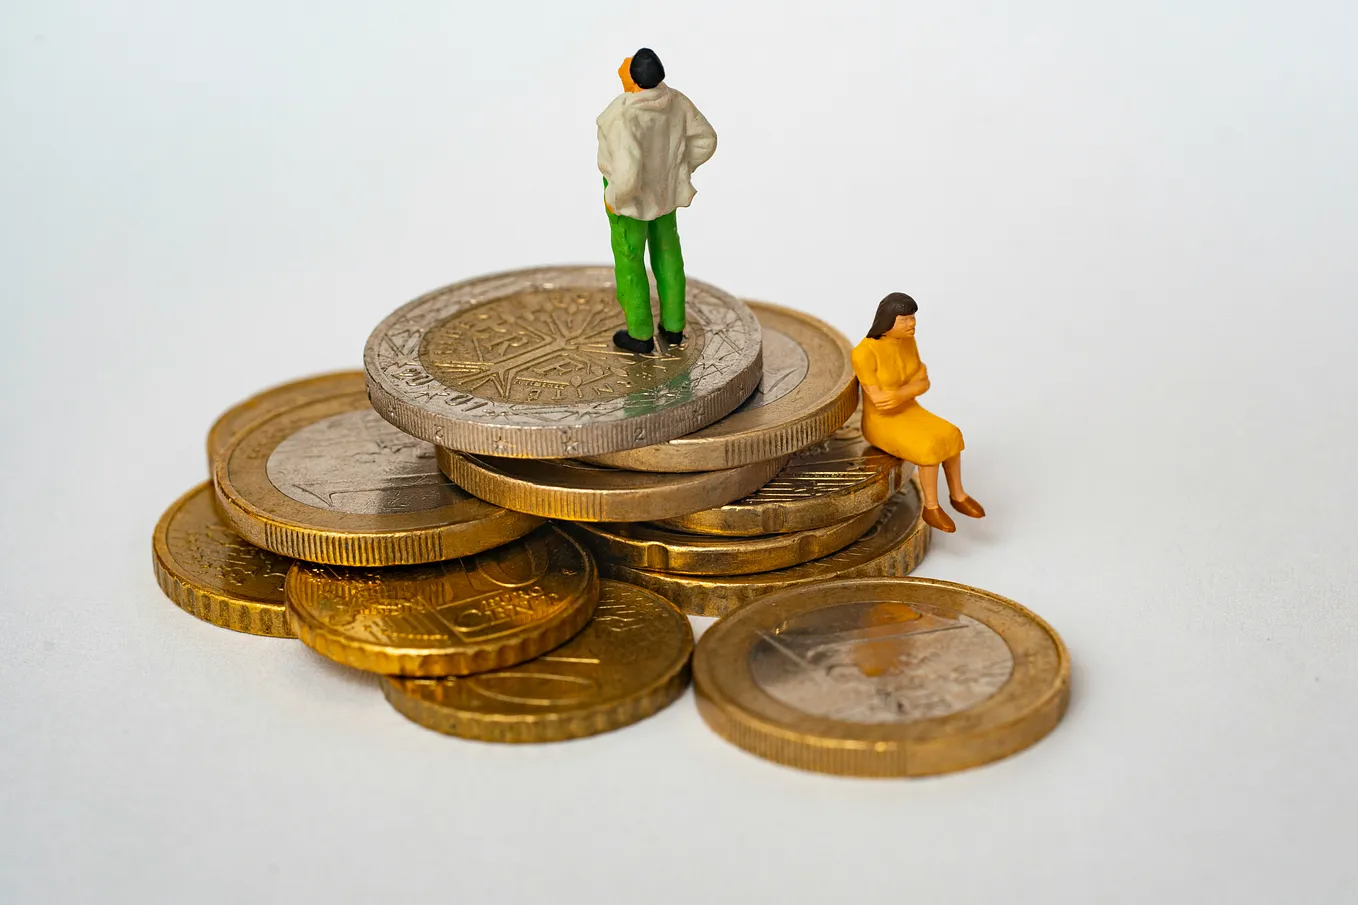 Toy man and woman on coins.